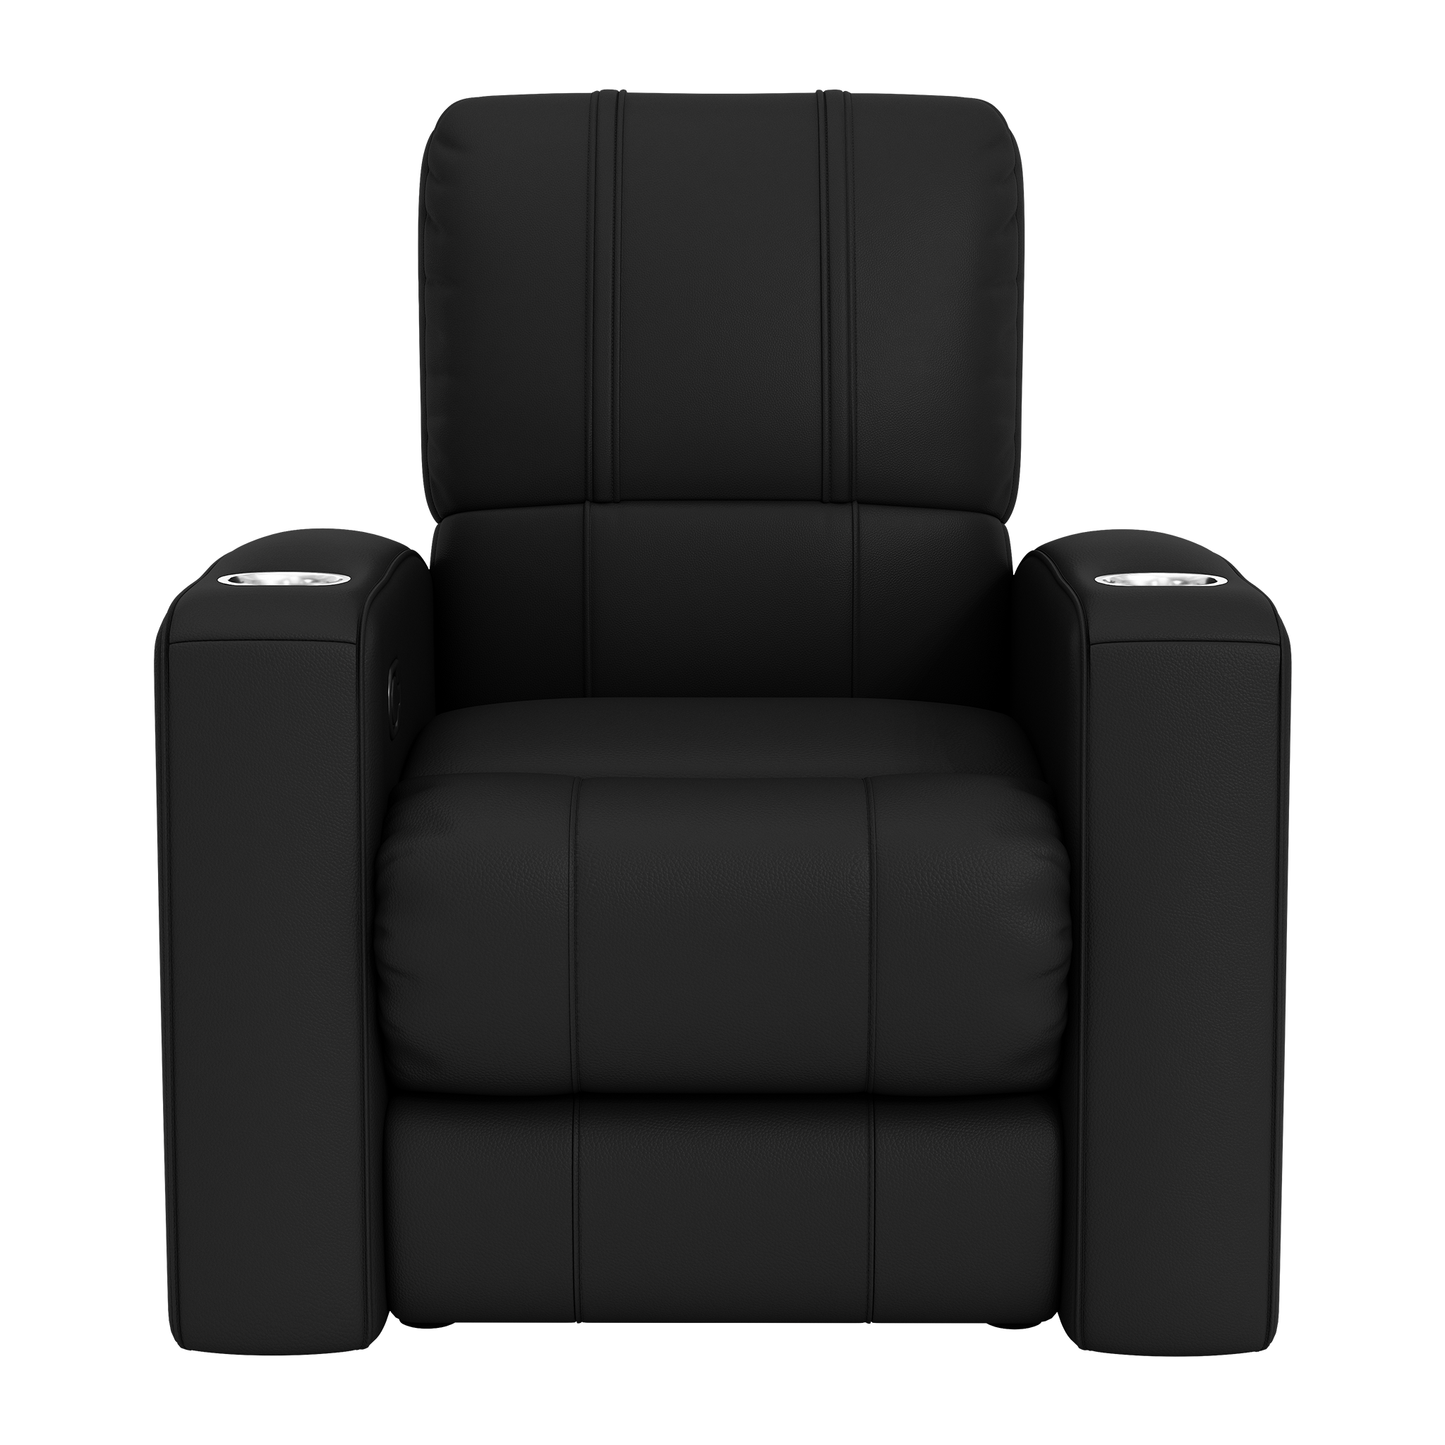 Relax Home Theater Recliner with Kansas City Royals Secondary